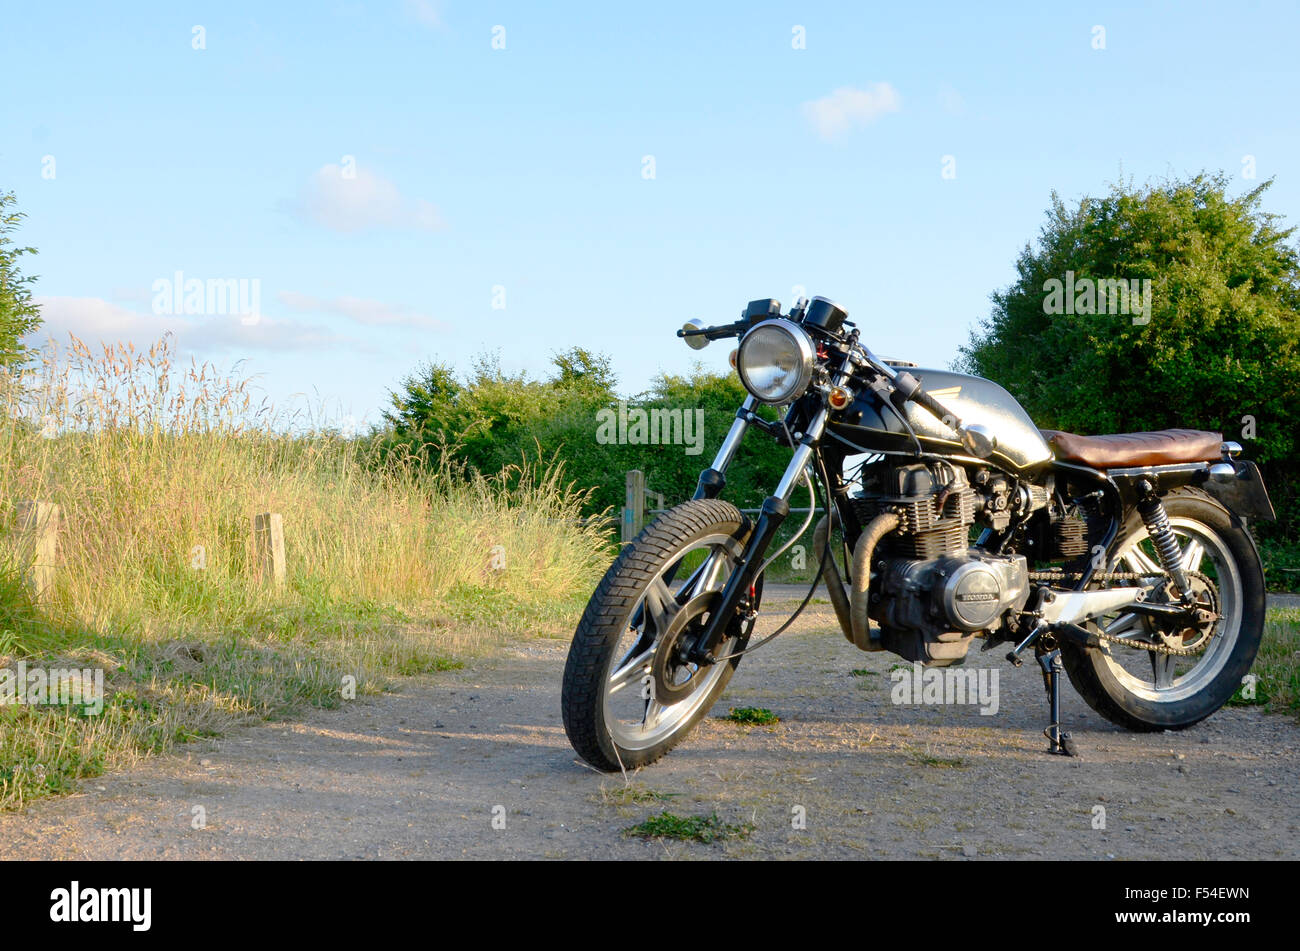 Honda Cafe Racer motorbike in black photographed infront of a field of  grass Stock Photo - Alamy